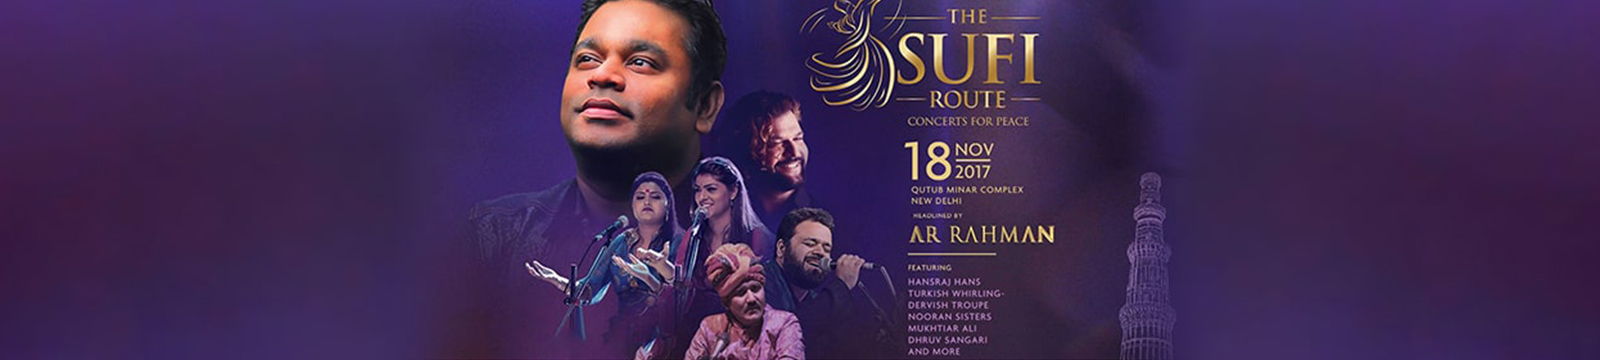 The Sufi Route Featuring AR Rahman and Others Live in Concert